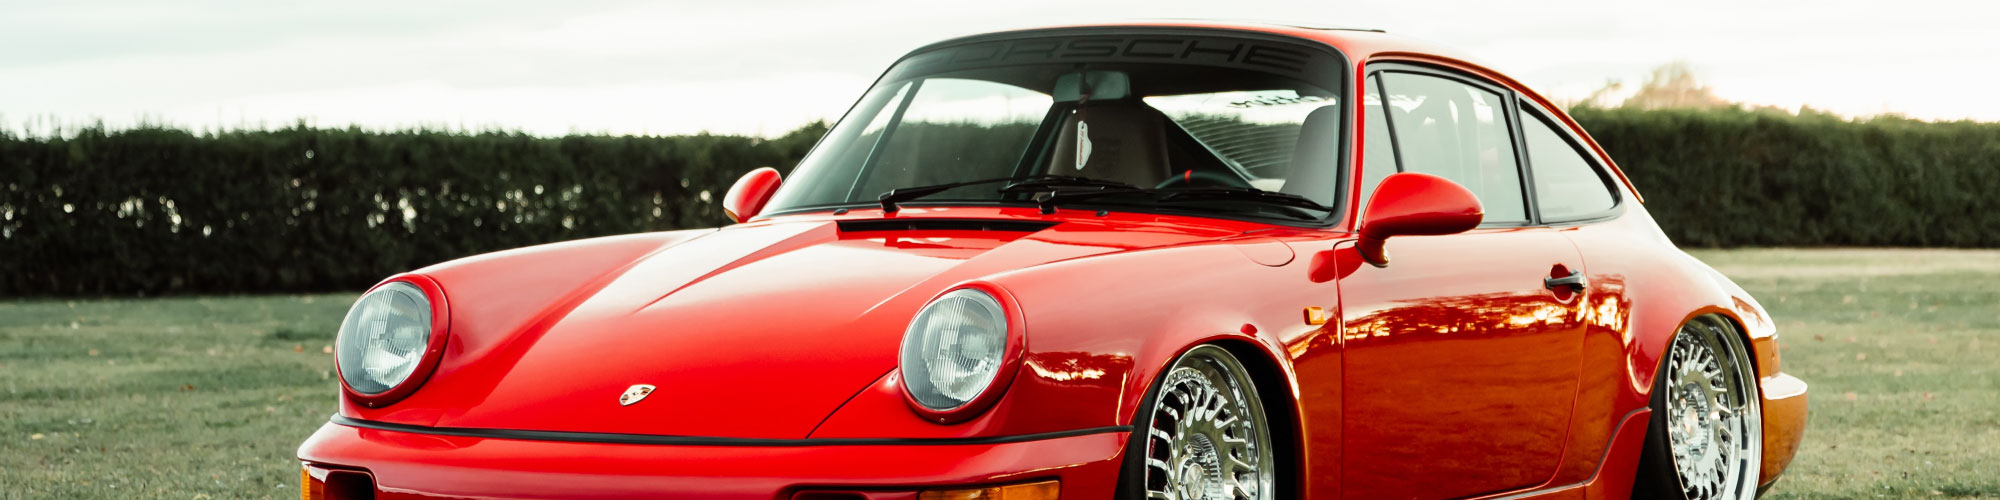 Porsche 964 guards red Buyers guide